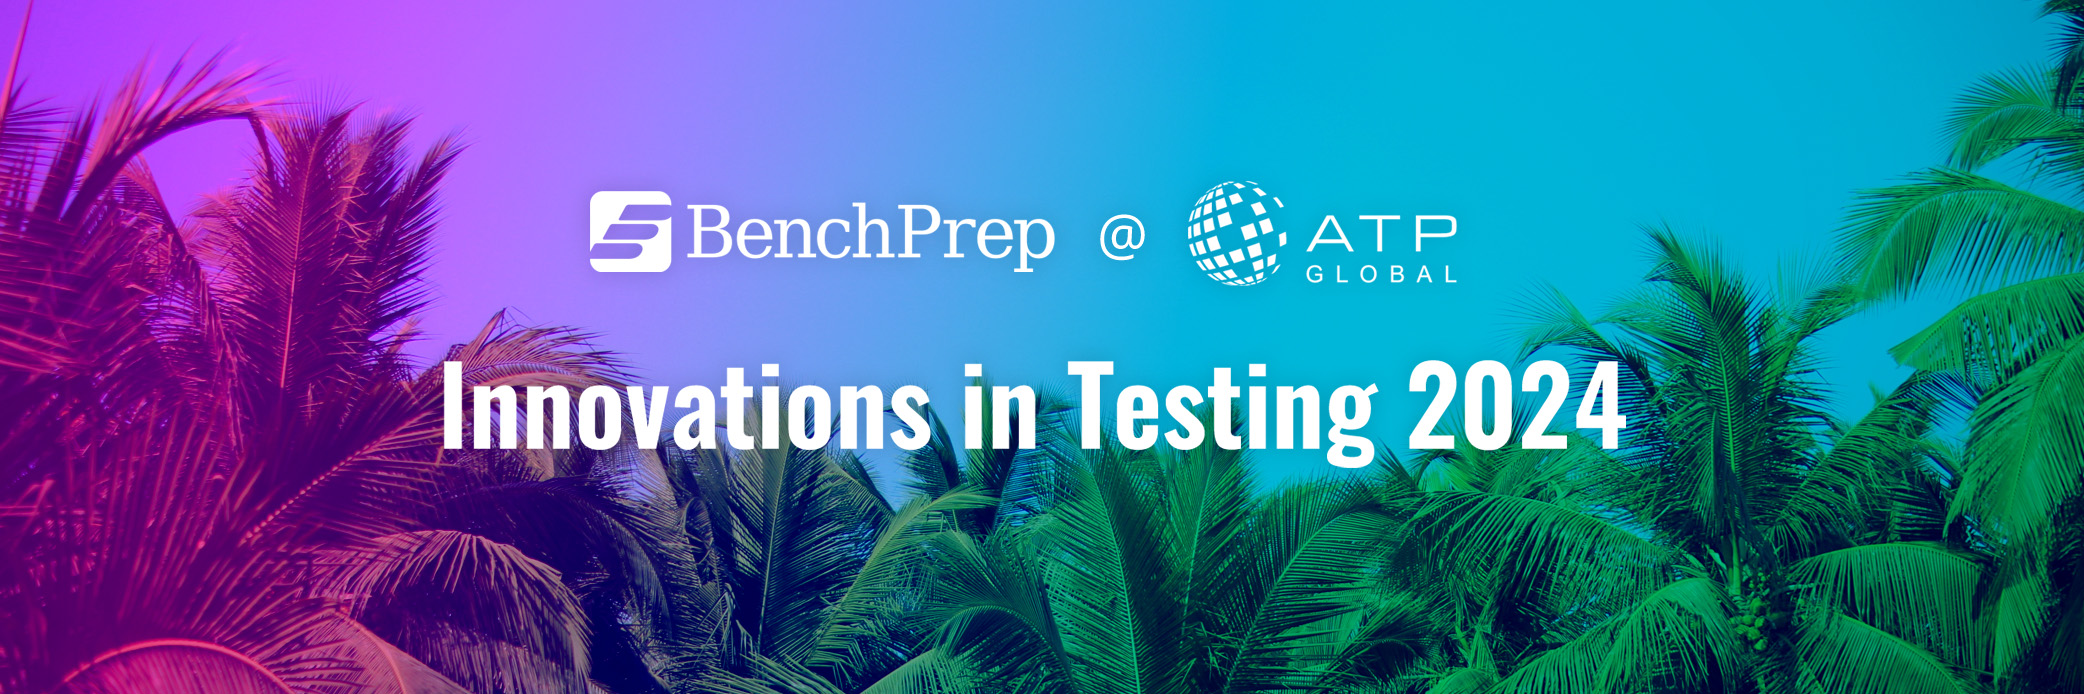 BenchPrep Will Be in Booth #216 at the 2024 ATP Innovations in Testing Conference in Anaheim, California